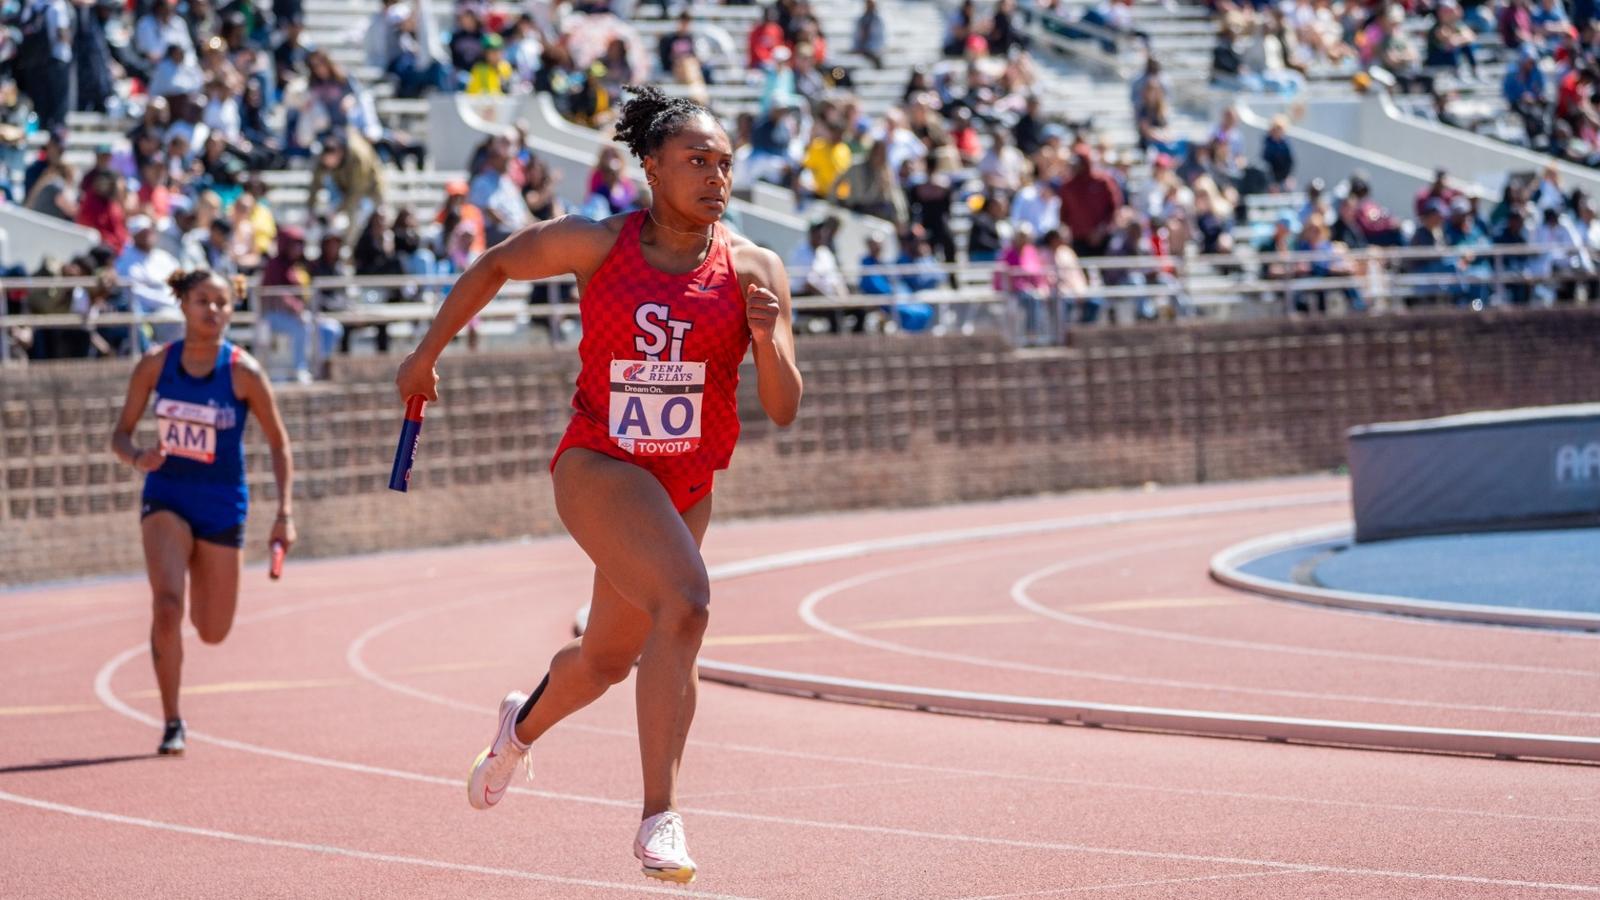 St. John’s Readies for the BIG EAST Outdoor Track & Field Championships